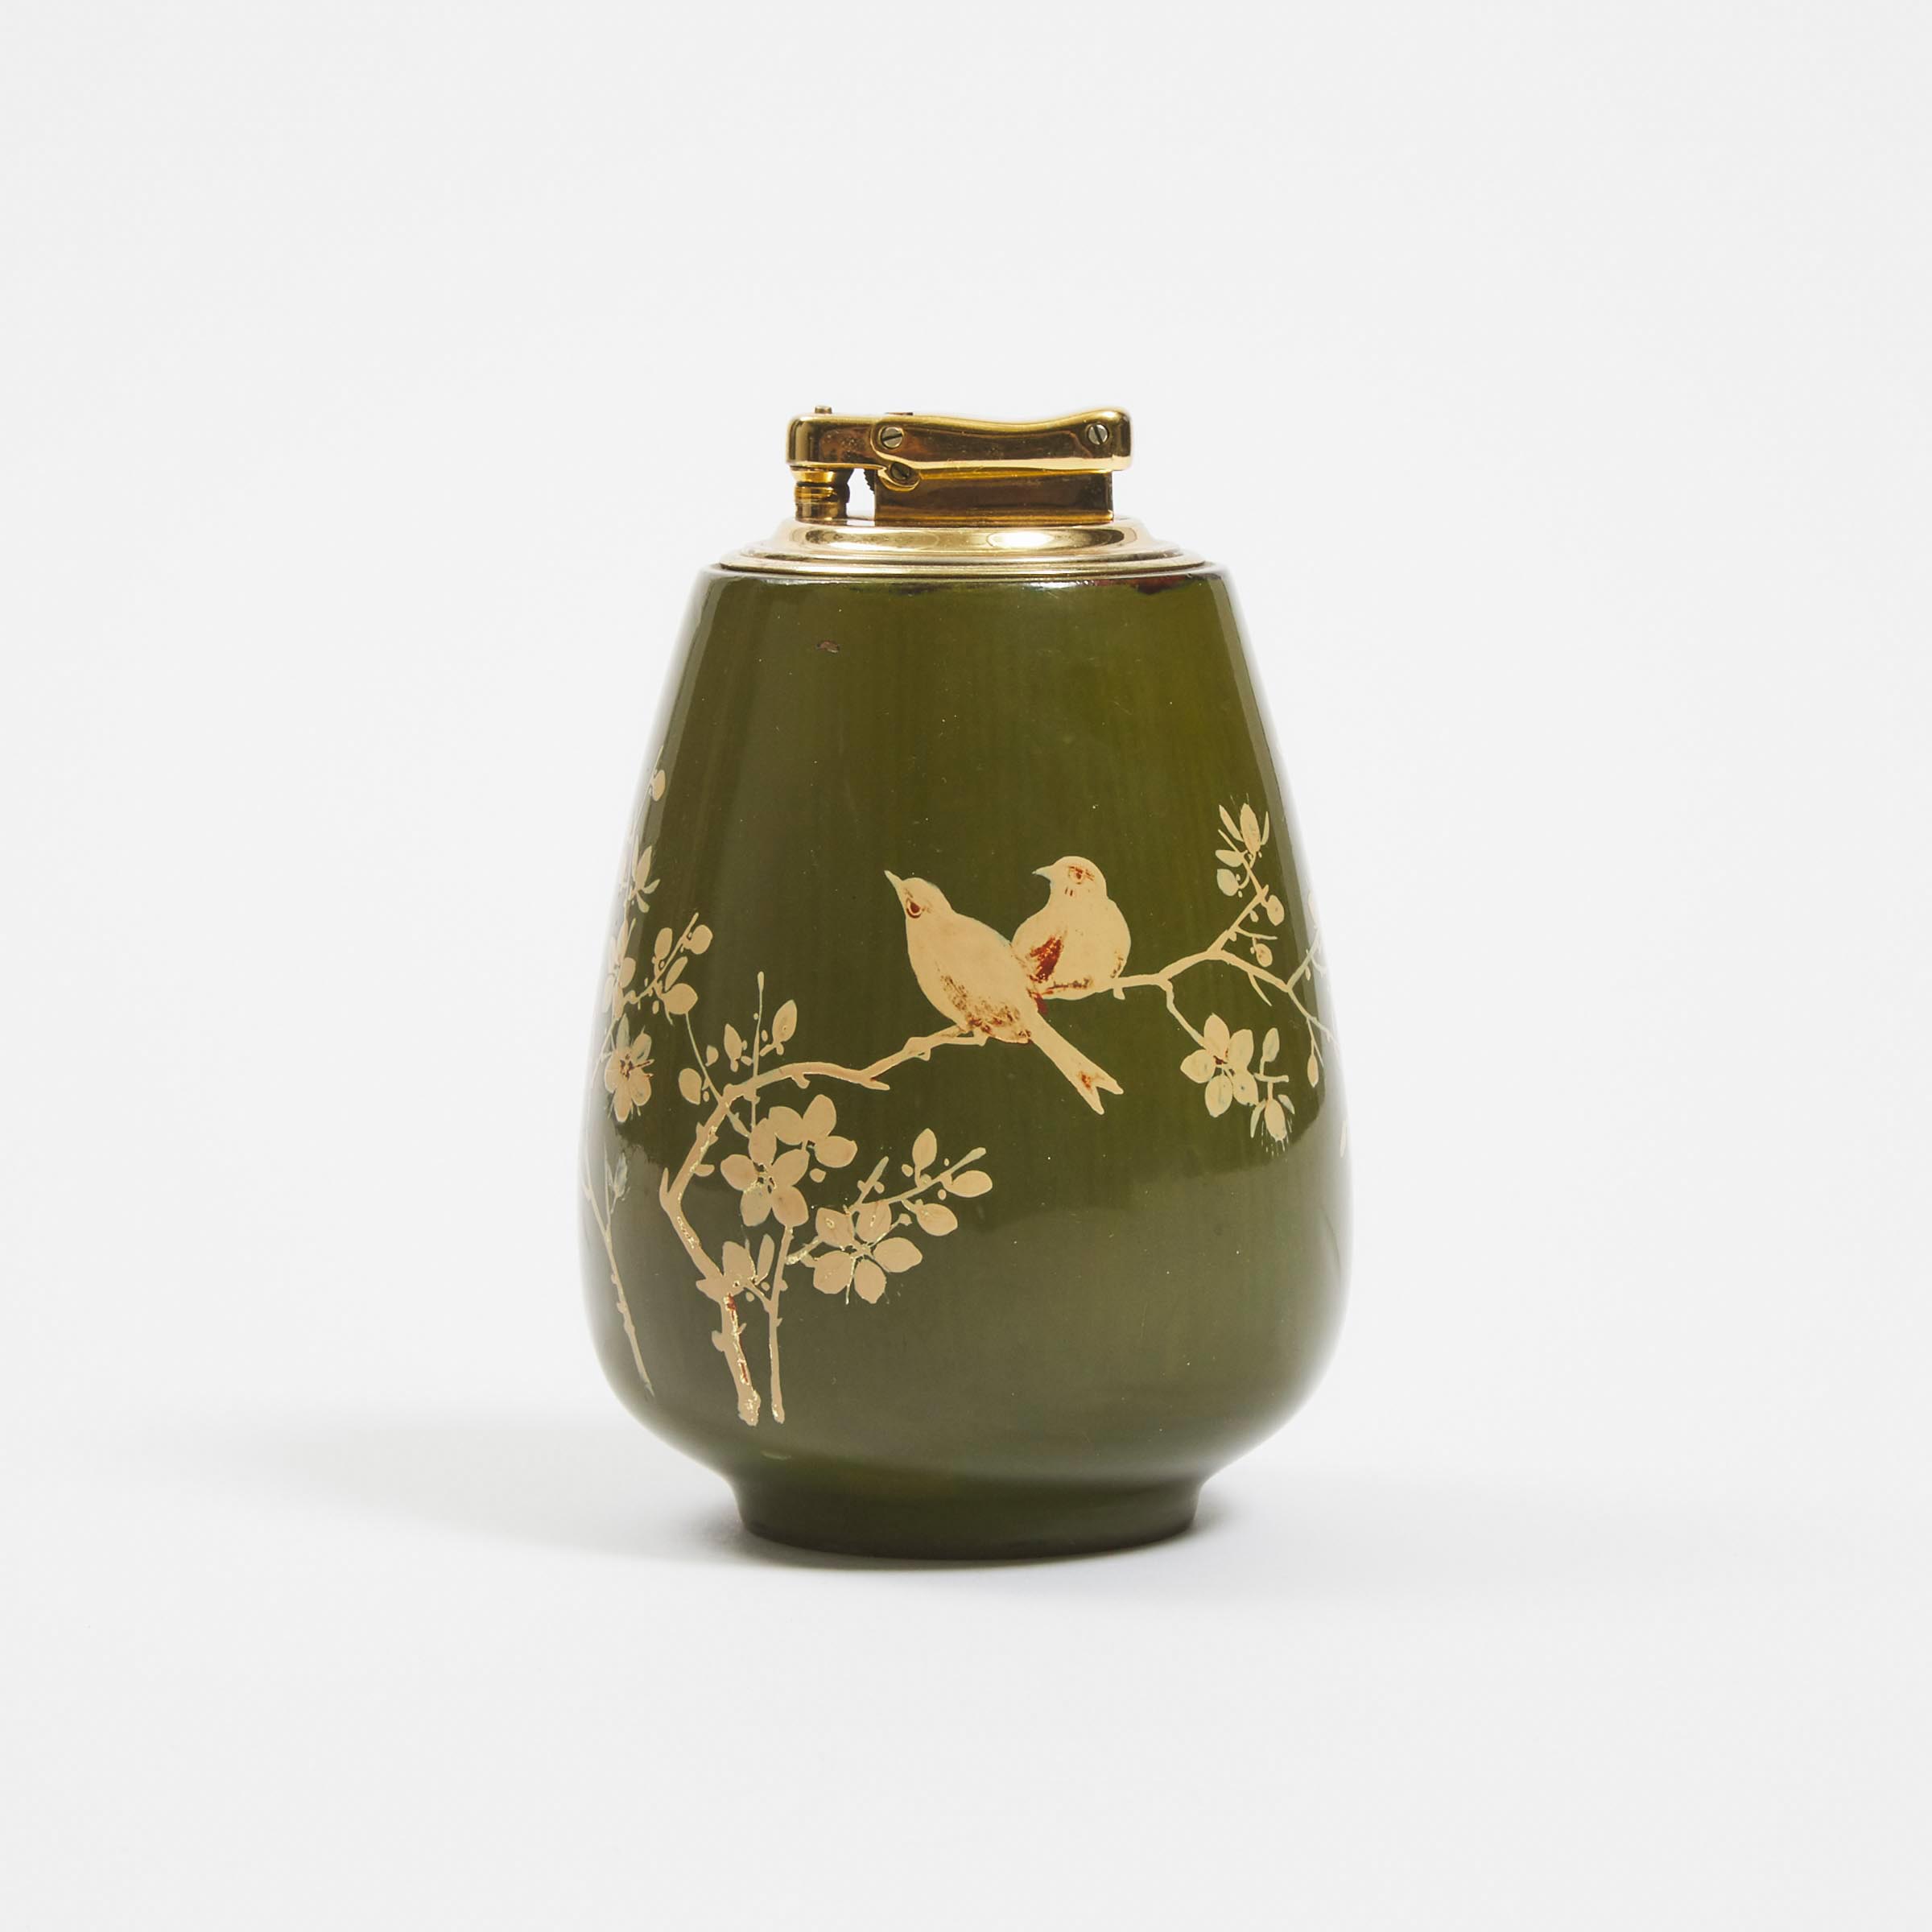 Thanh Lê Nguyen (1919-2003), A Gilt Enameled 'Magpie and Prunus' Lacquered Metal Vessel, Later Mounted as a Lighter, Circa 1960